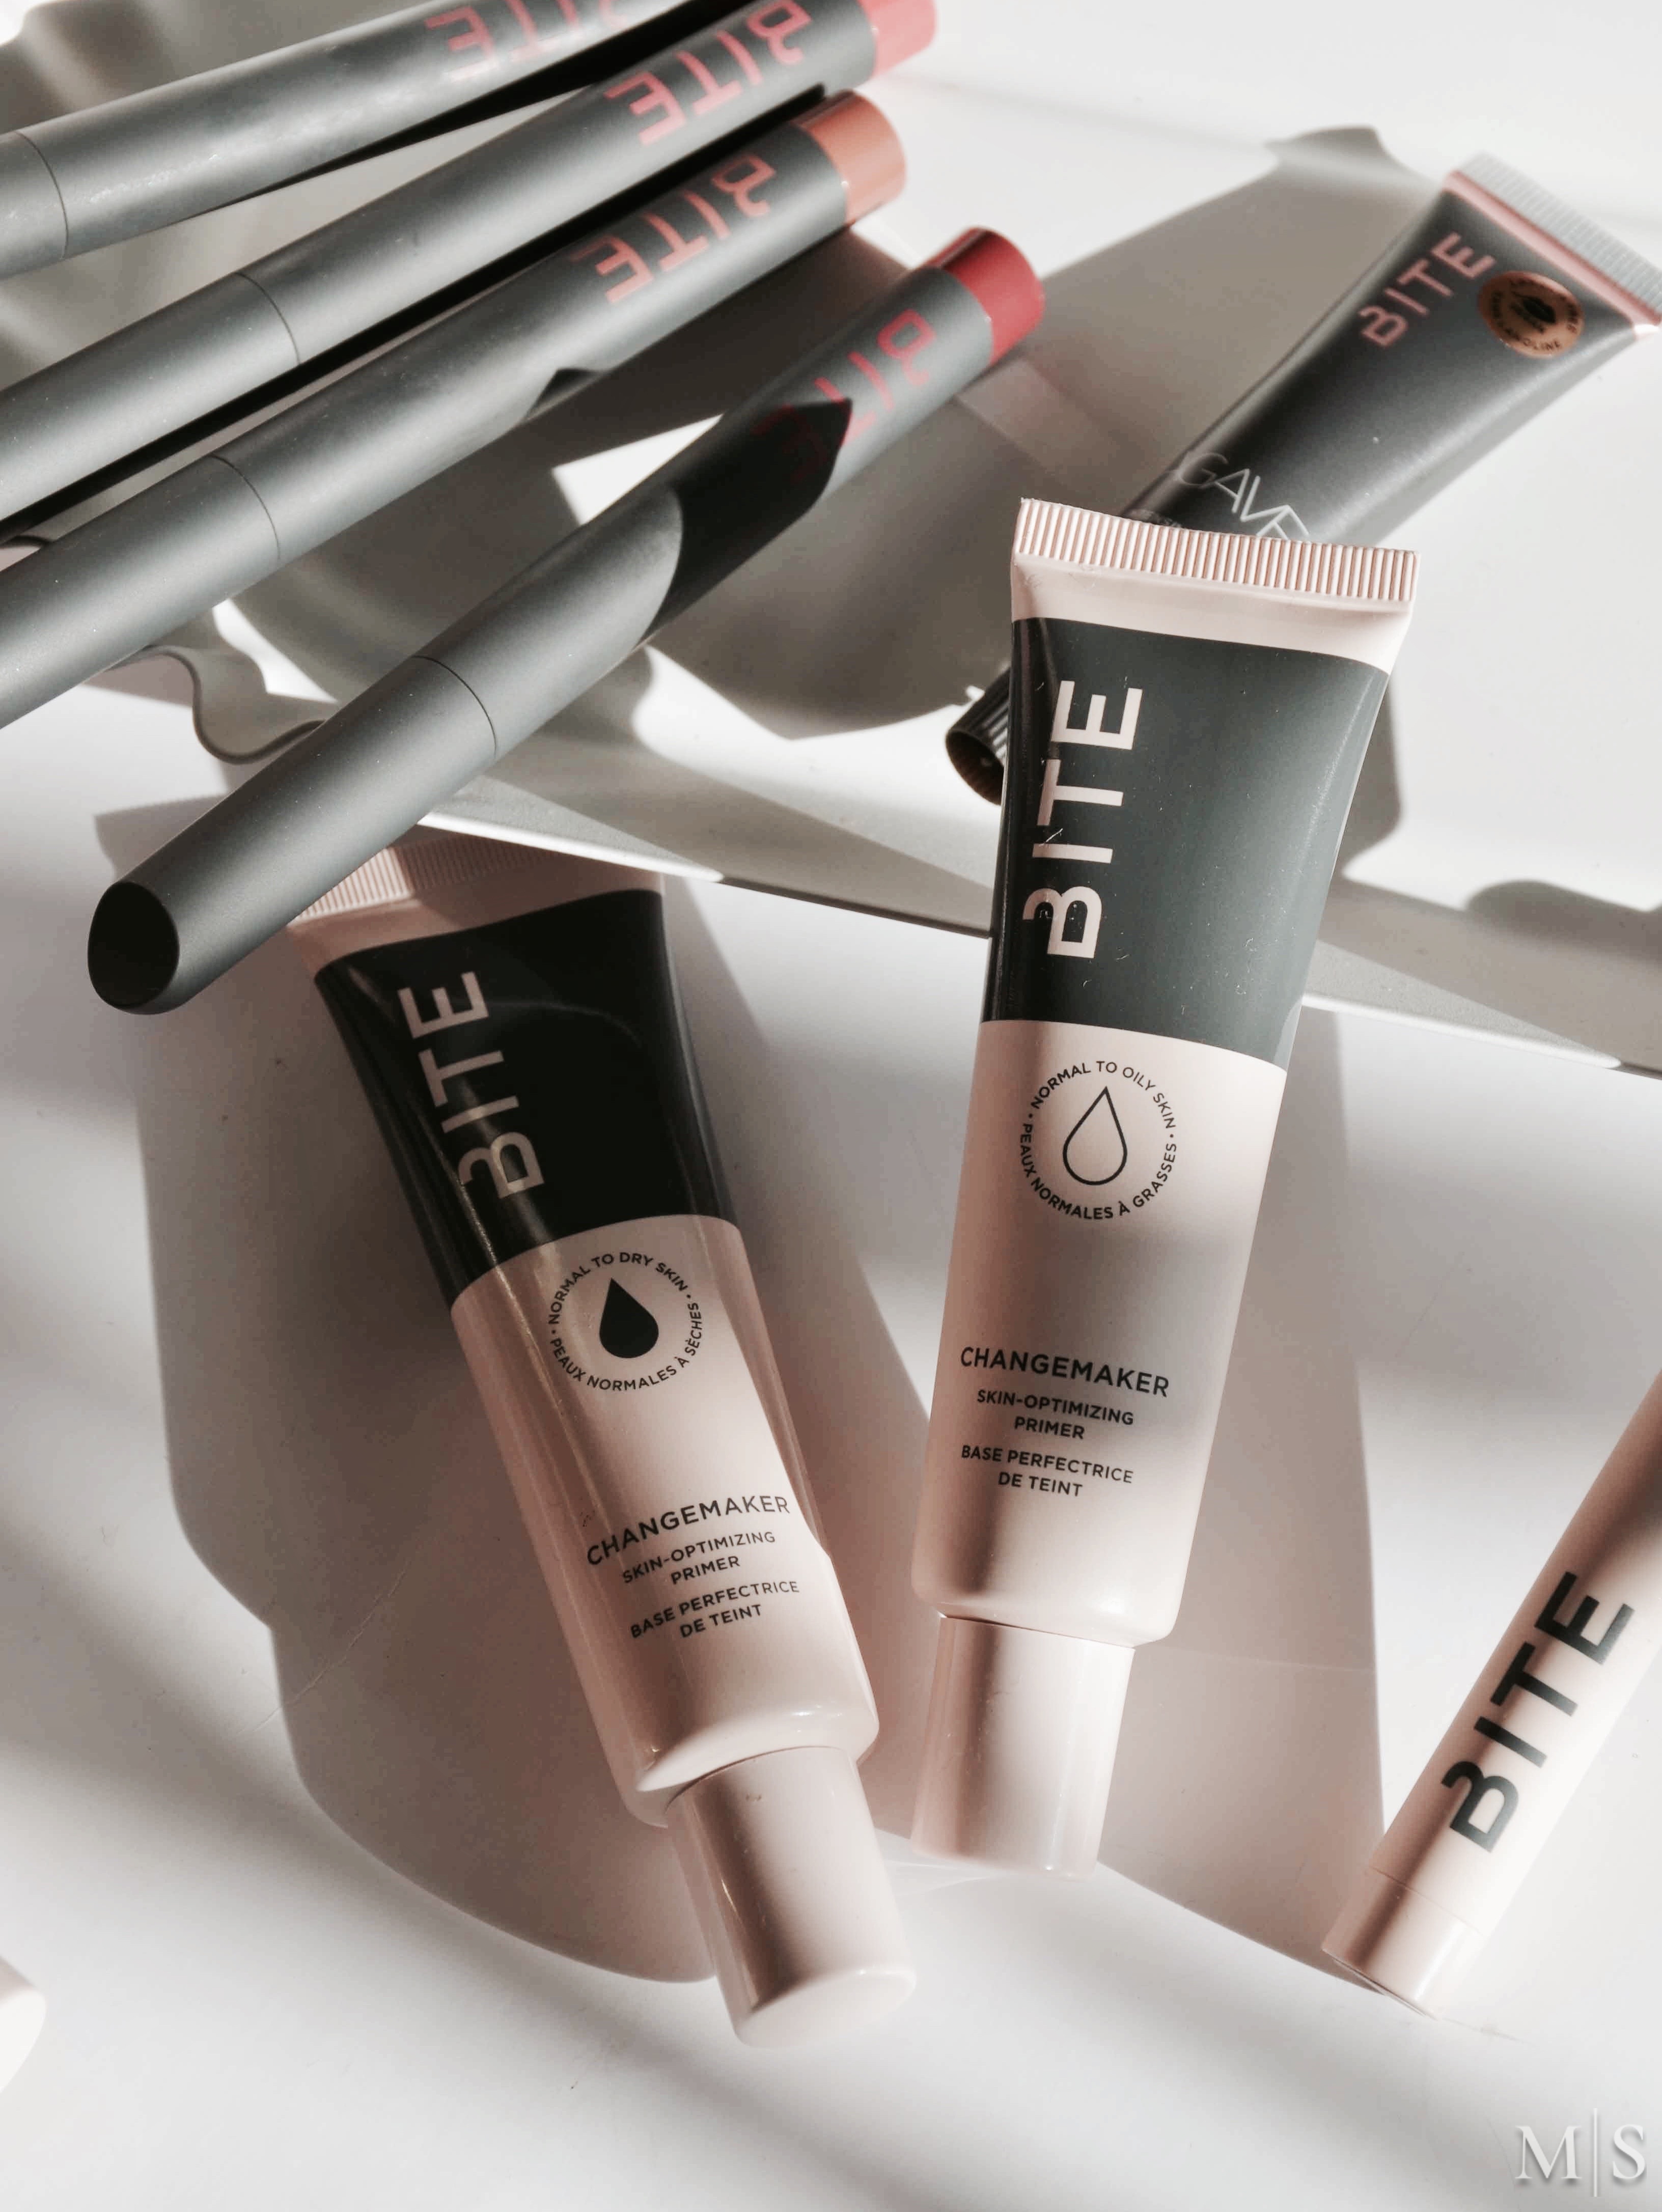 New from Bite Beauty